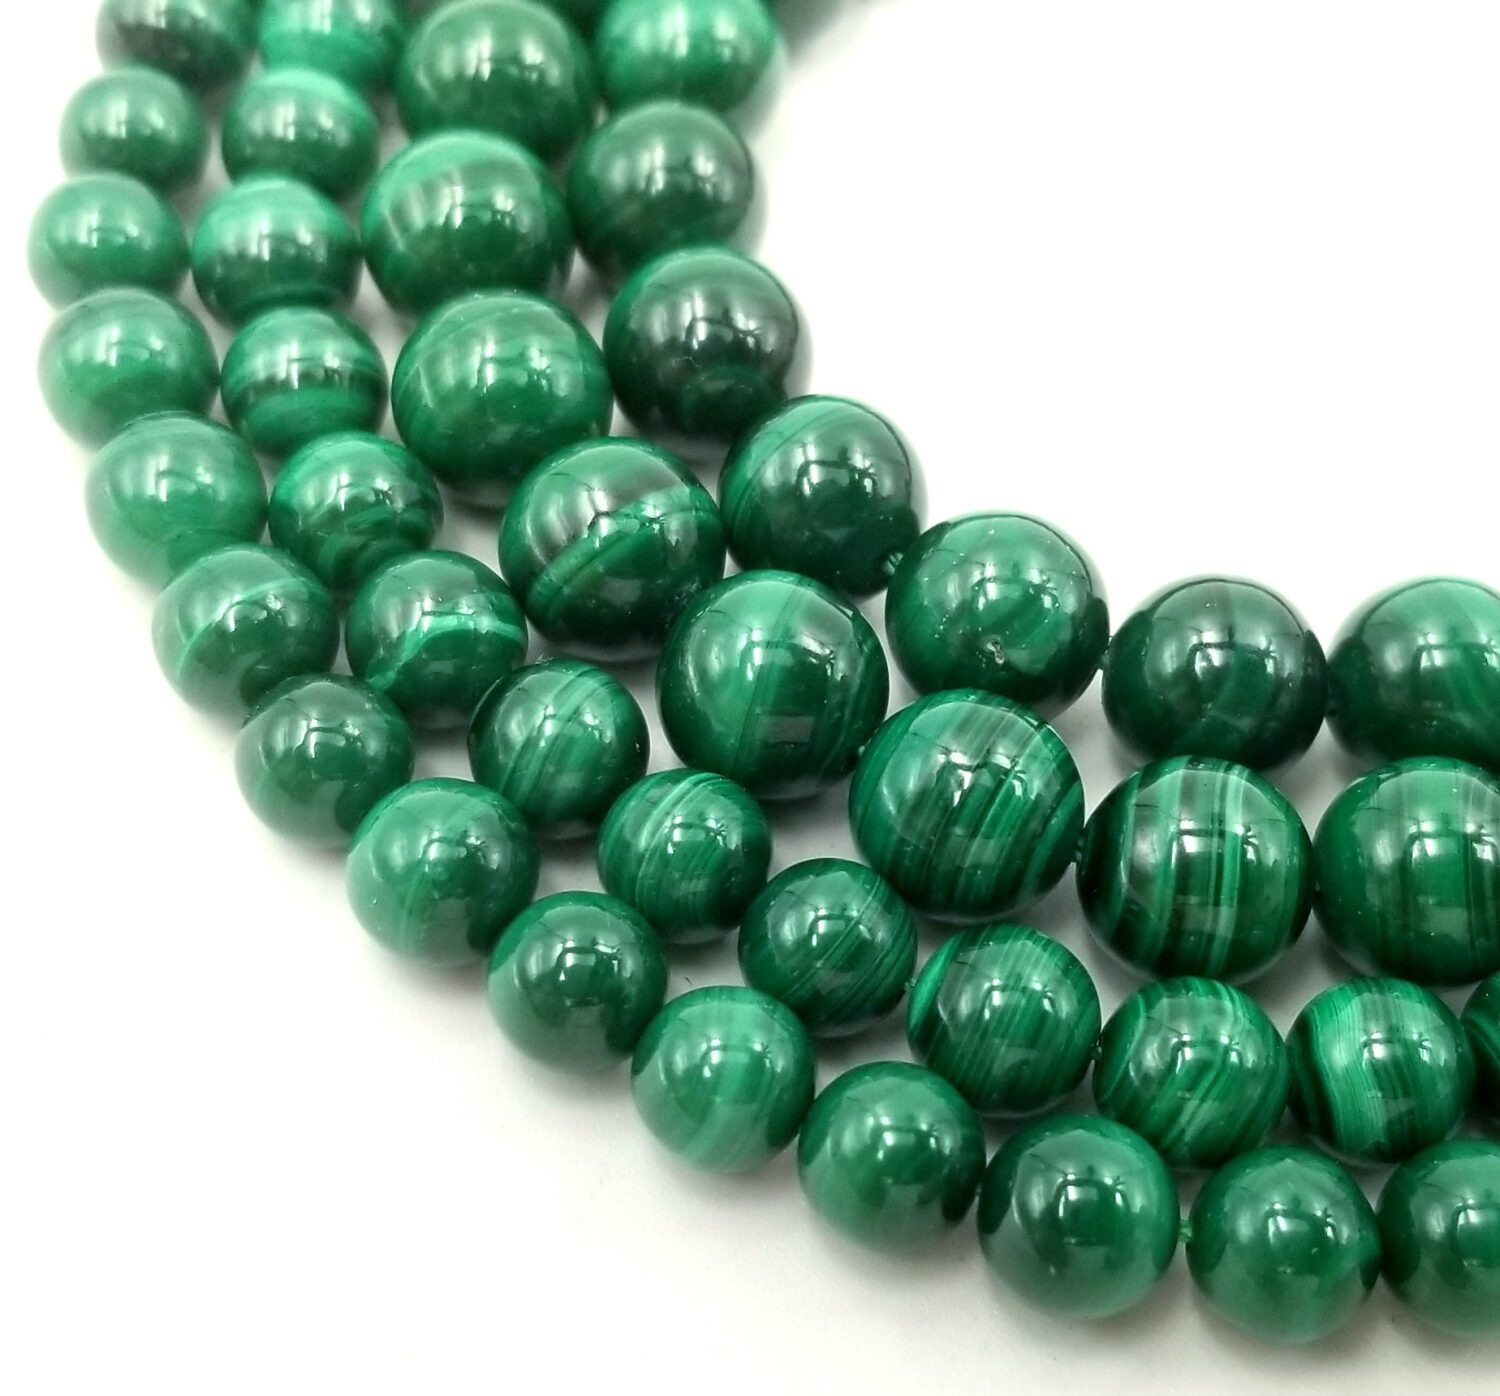 Genuine Green Jade Beads Round, Smooth Loose Jade Beads for Jewelry Making,  8mm Beads, 15.5 Inches per Strand 